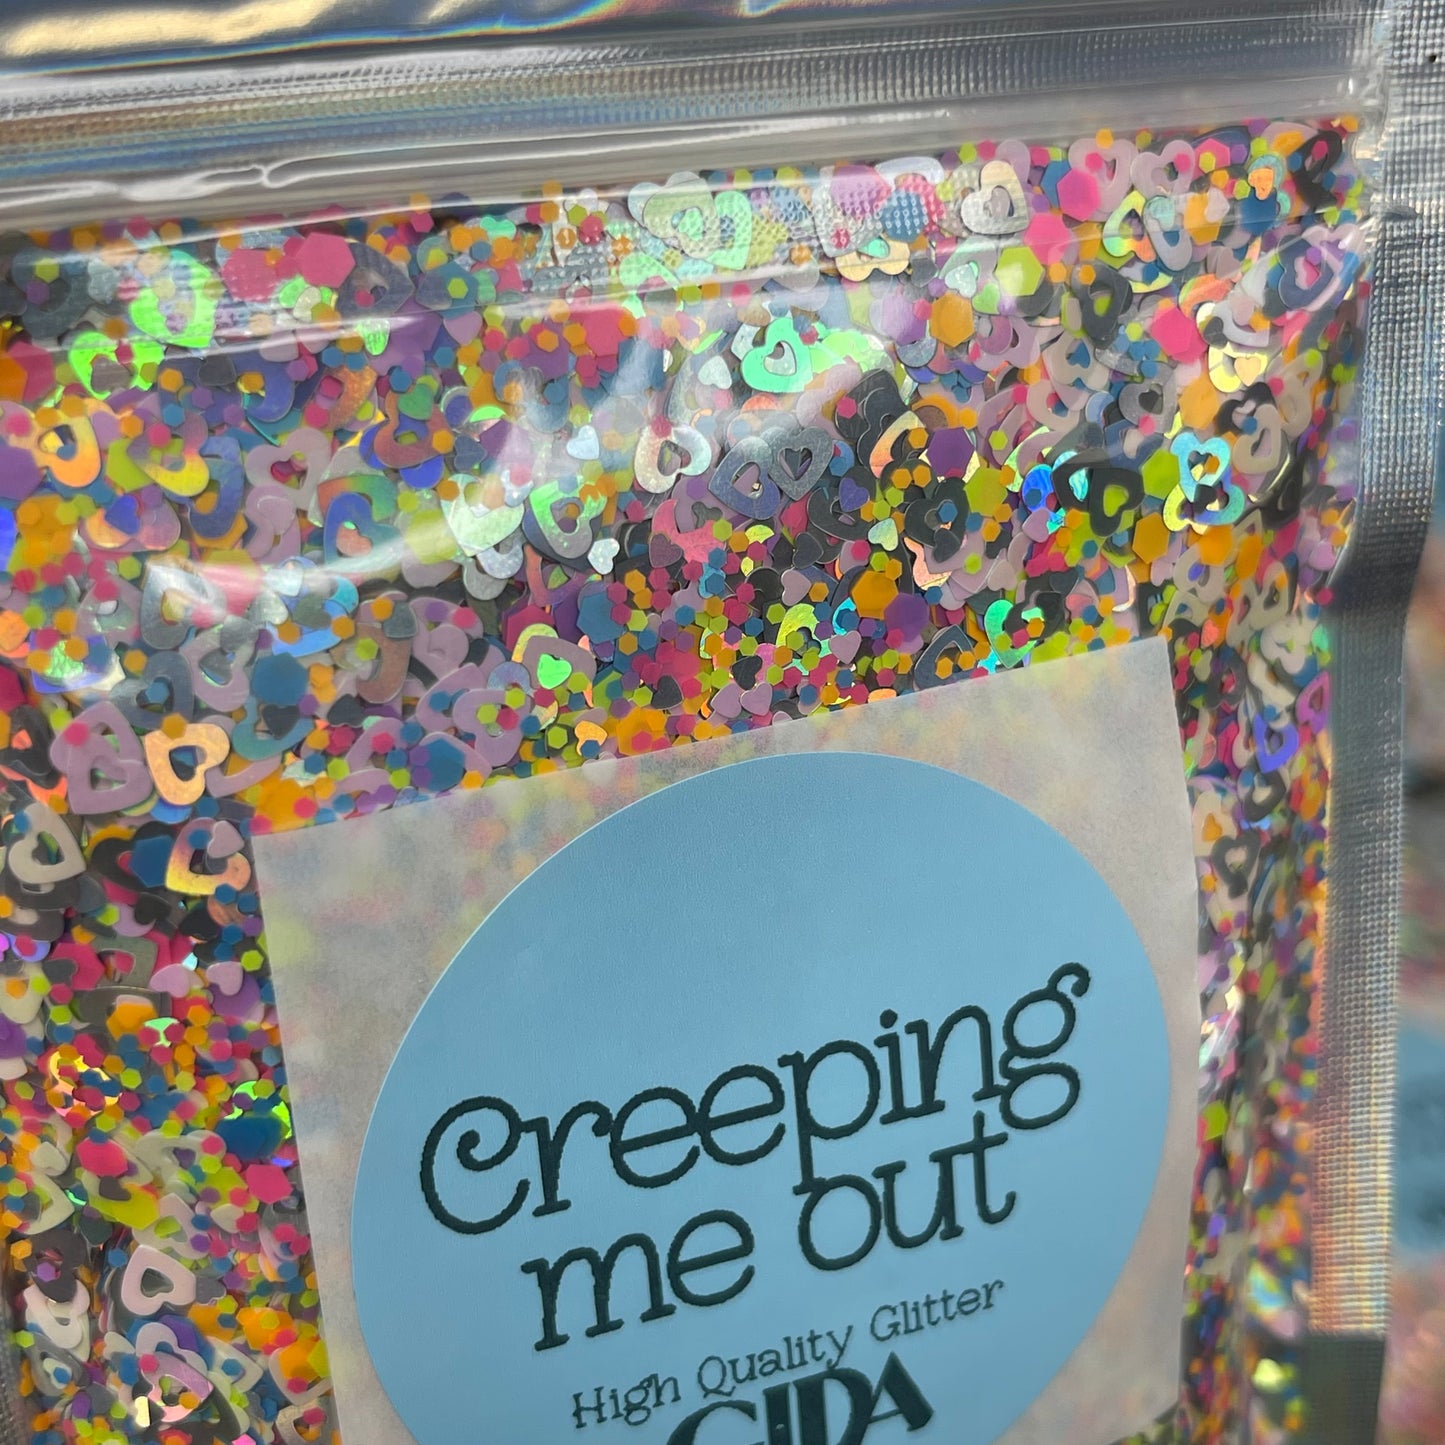 Creeping me out Glitter - 2.2 oz